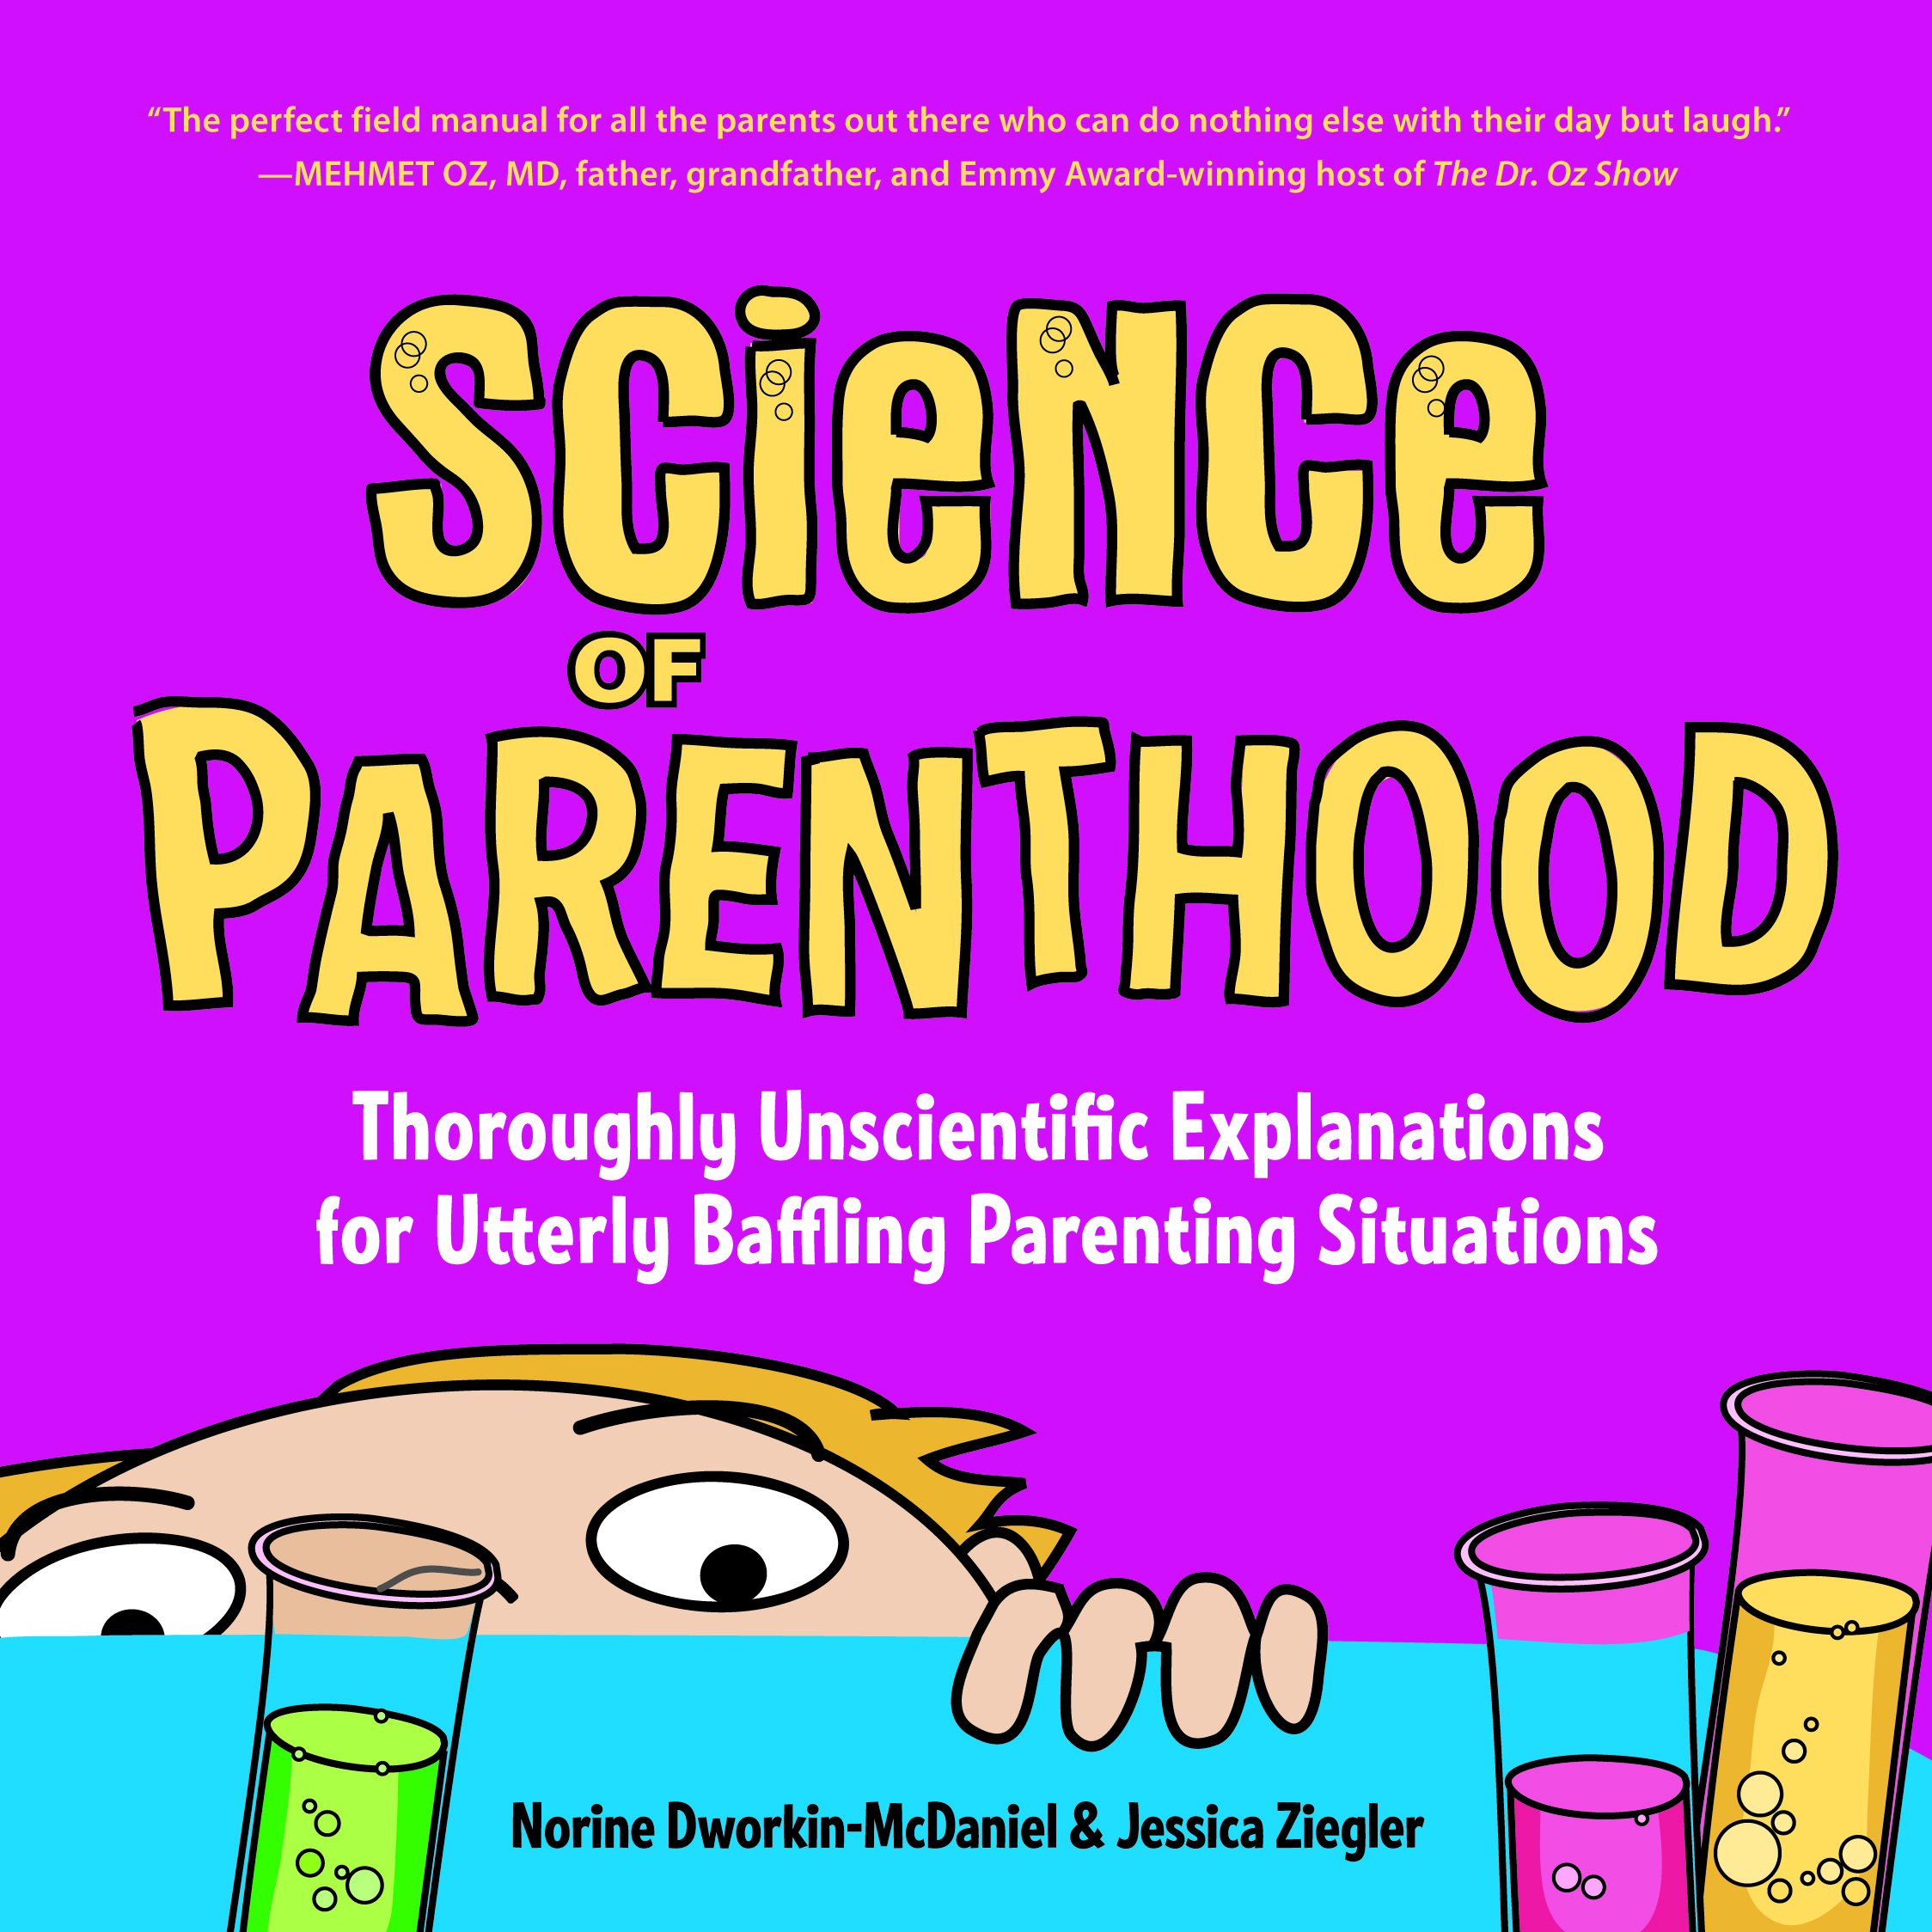 This book is hysterical, true and will make you feel MORE NORMAL, I promise! The perfect read for yourself or the perfect gift for anyone in your life who is a parent or soon-to-be-parent. Grab it up now!